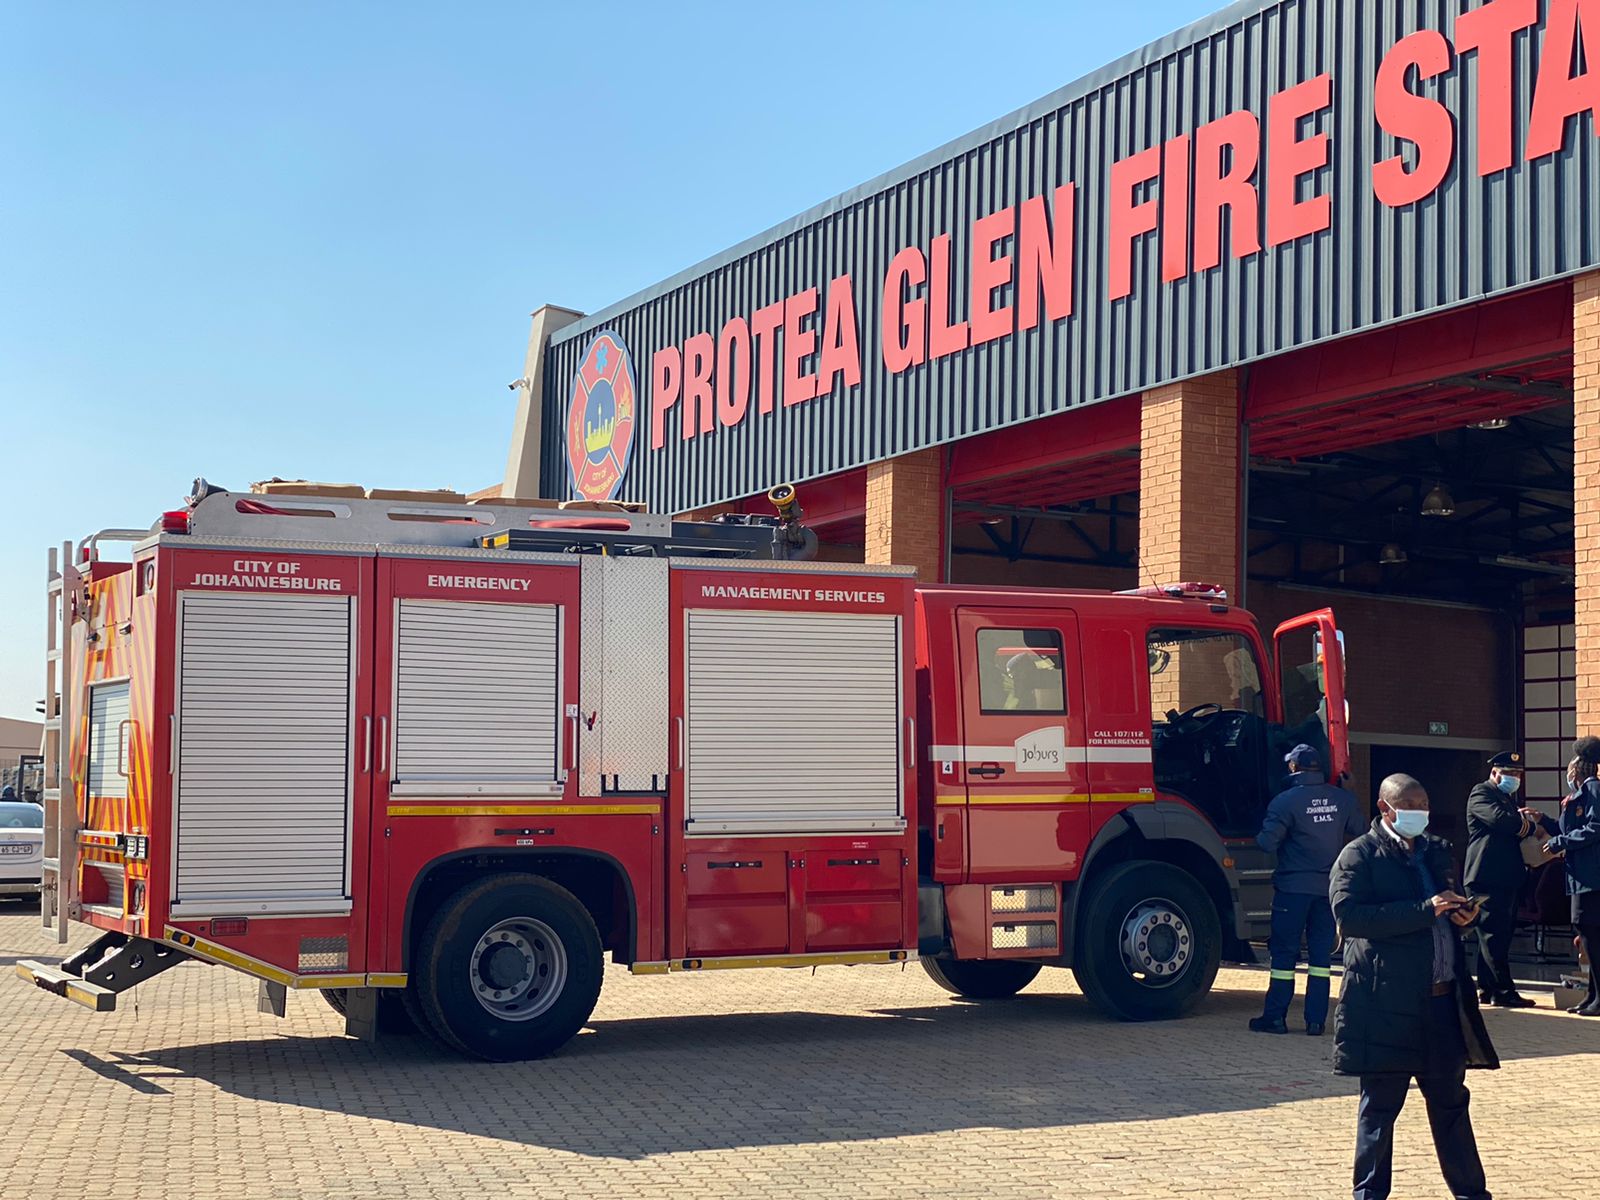 Protea Glen Fire Station equipped with gym and  swimming pool unveiled